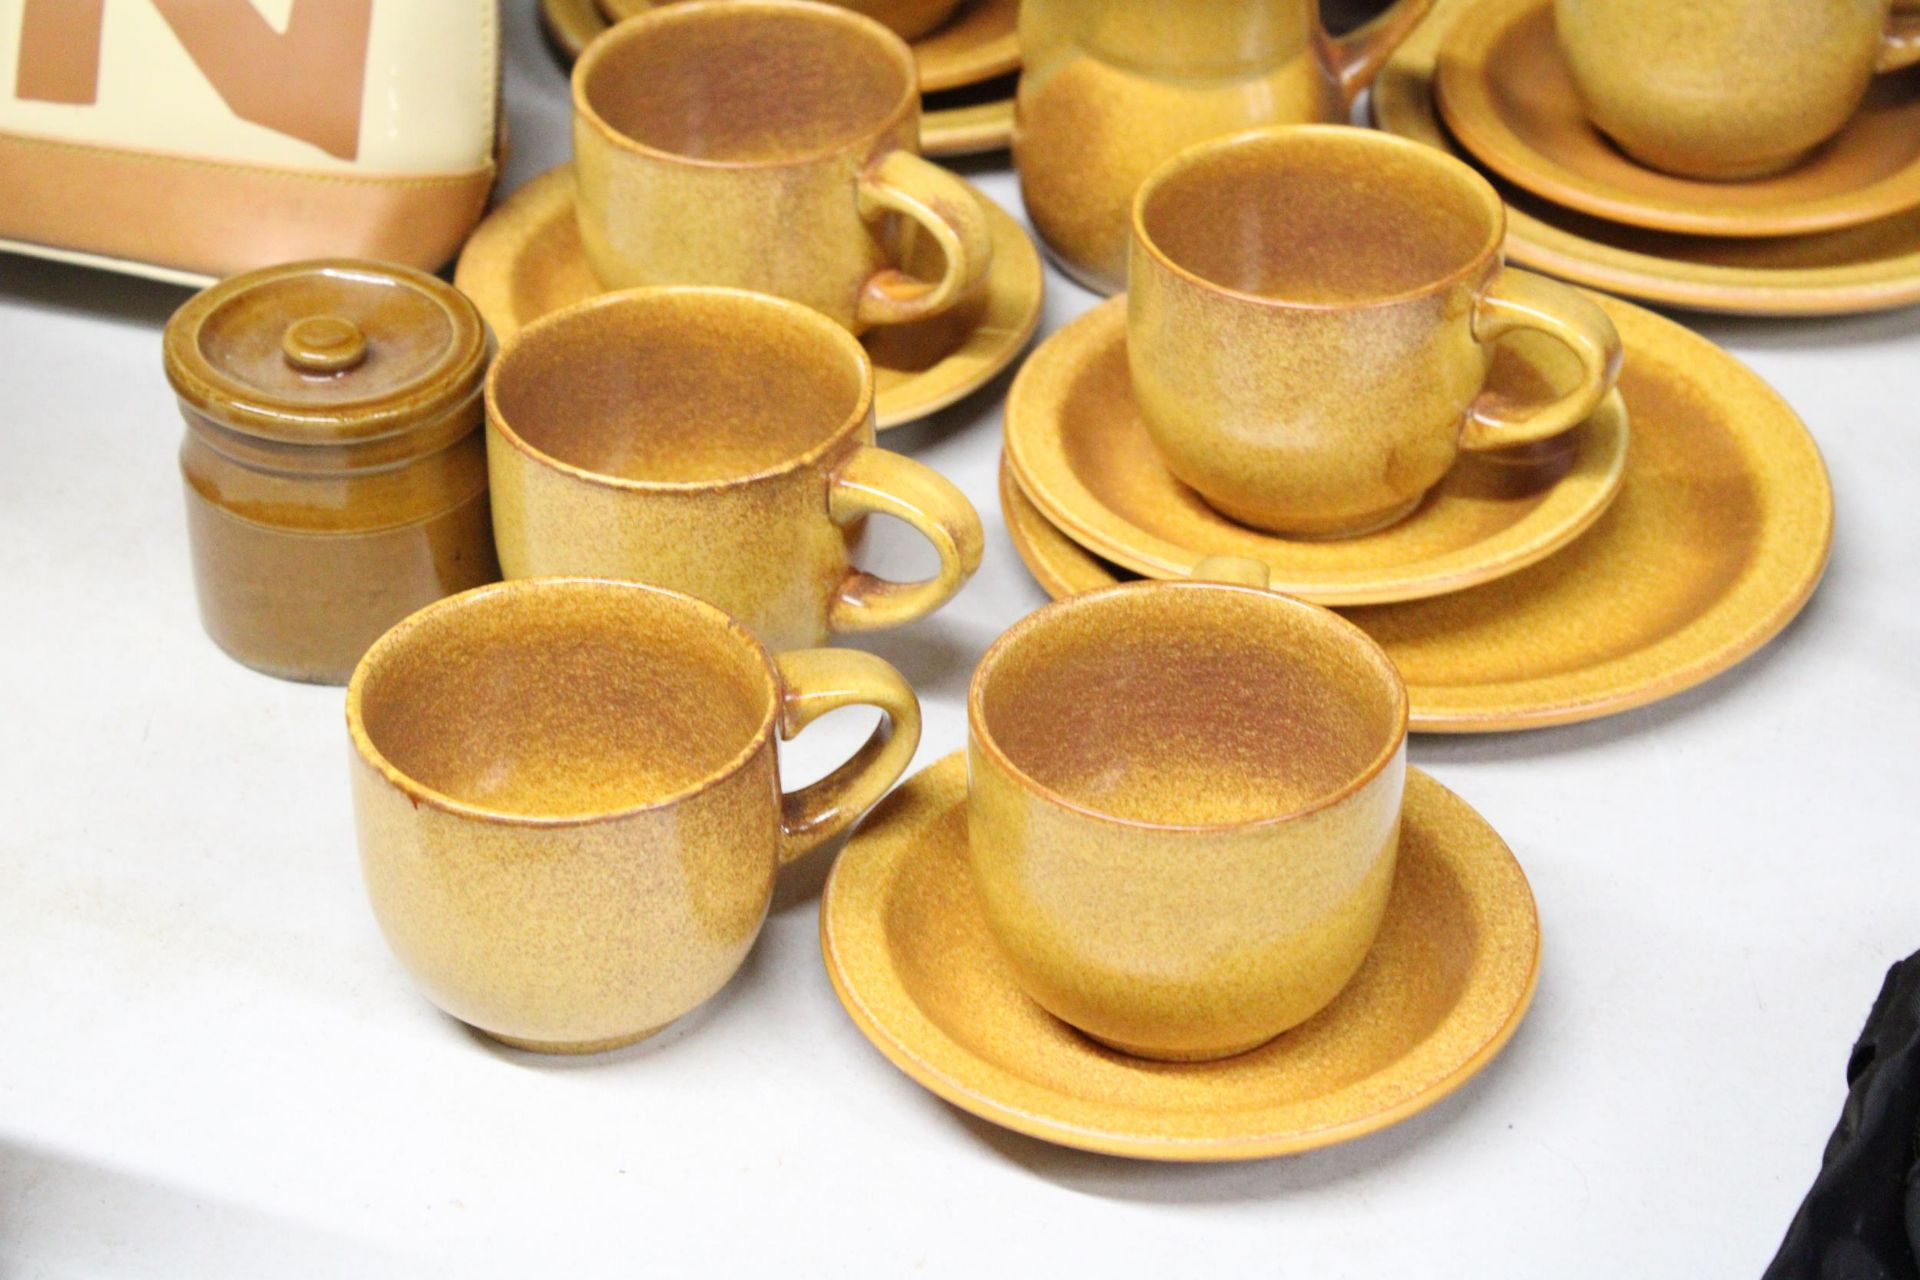 A STONEWARE COFFEE SET TO INCLUDE A CREAM JUG, SUGAR BOWL, CUPS, SAUCERS AND SIDE PLATES, PLUS JUGS, - Image 2 of 5